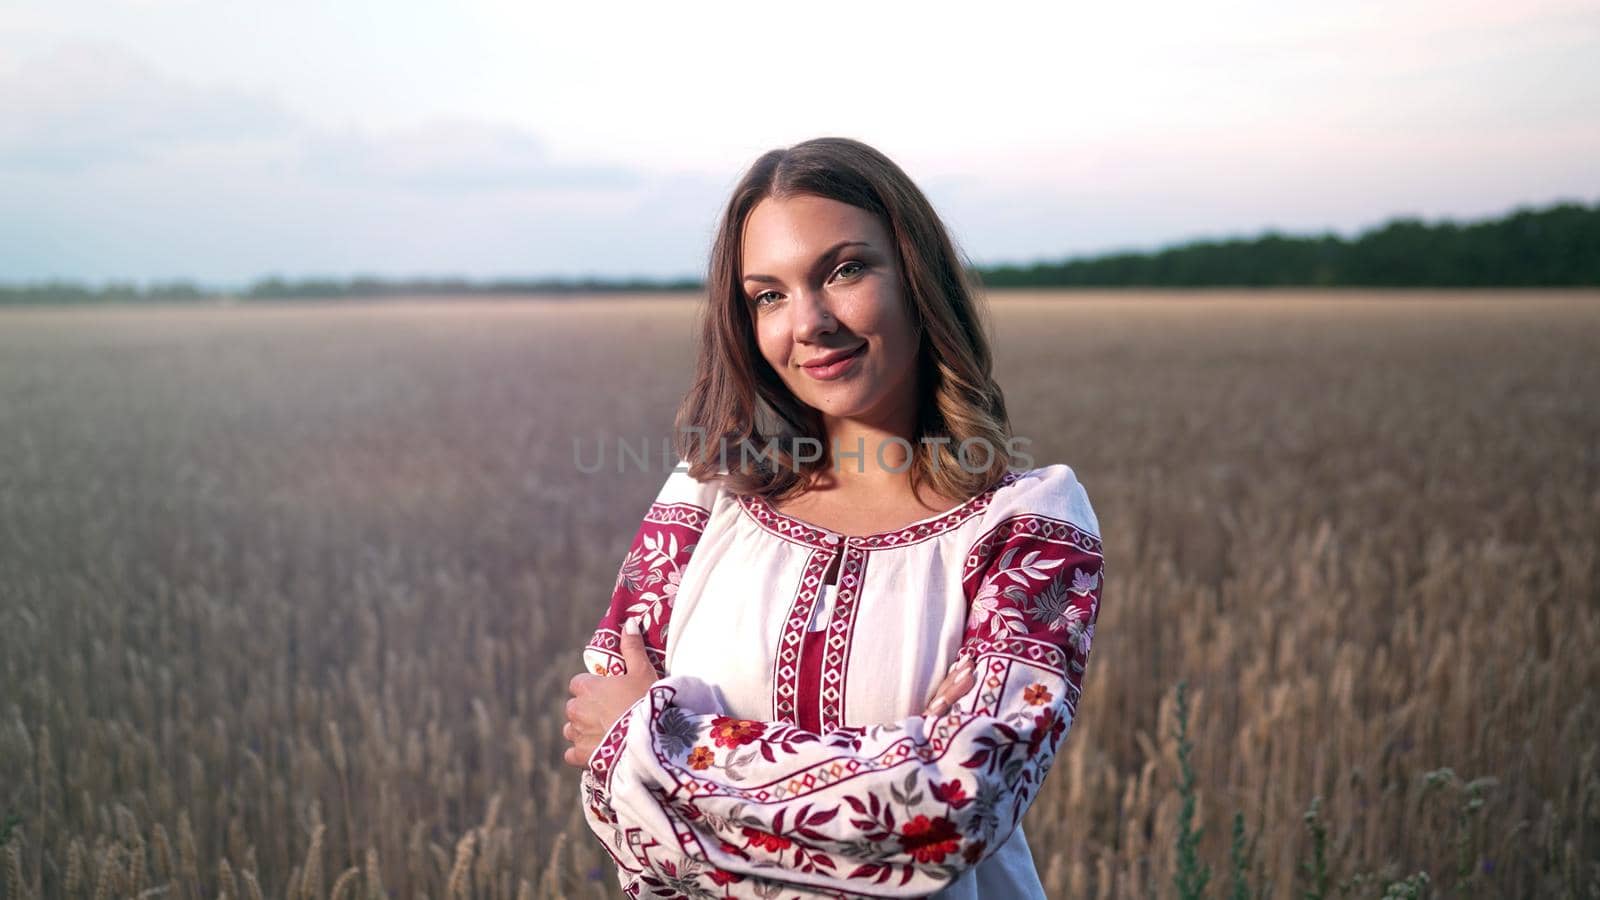 Smiling ukrainian woman in yellow ripe wheat field. Young lady in traditional embroidery vyshyvanka. Ukraine, independence, freedom, patriot symbol, victory in war. High quality photo